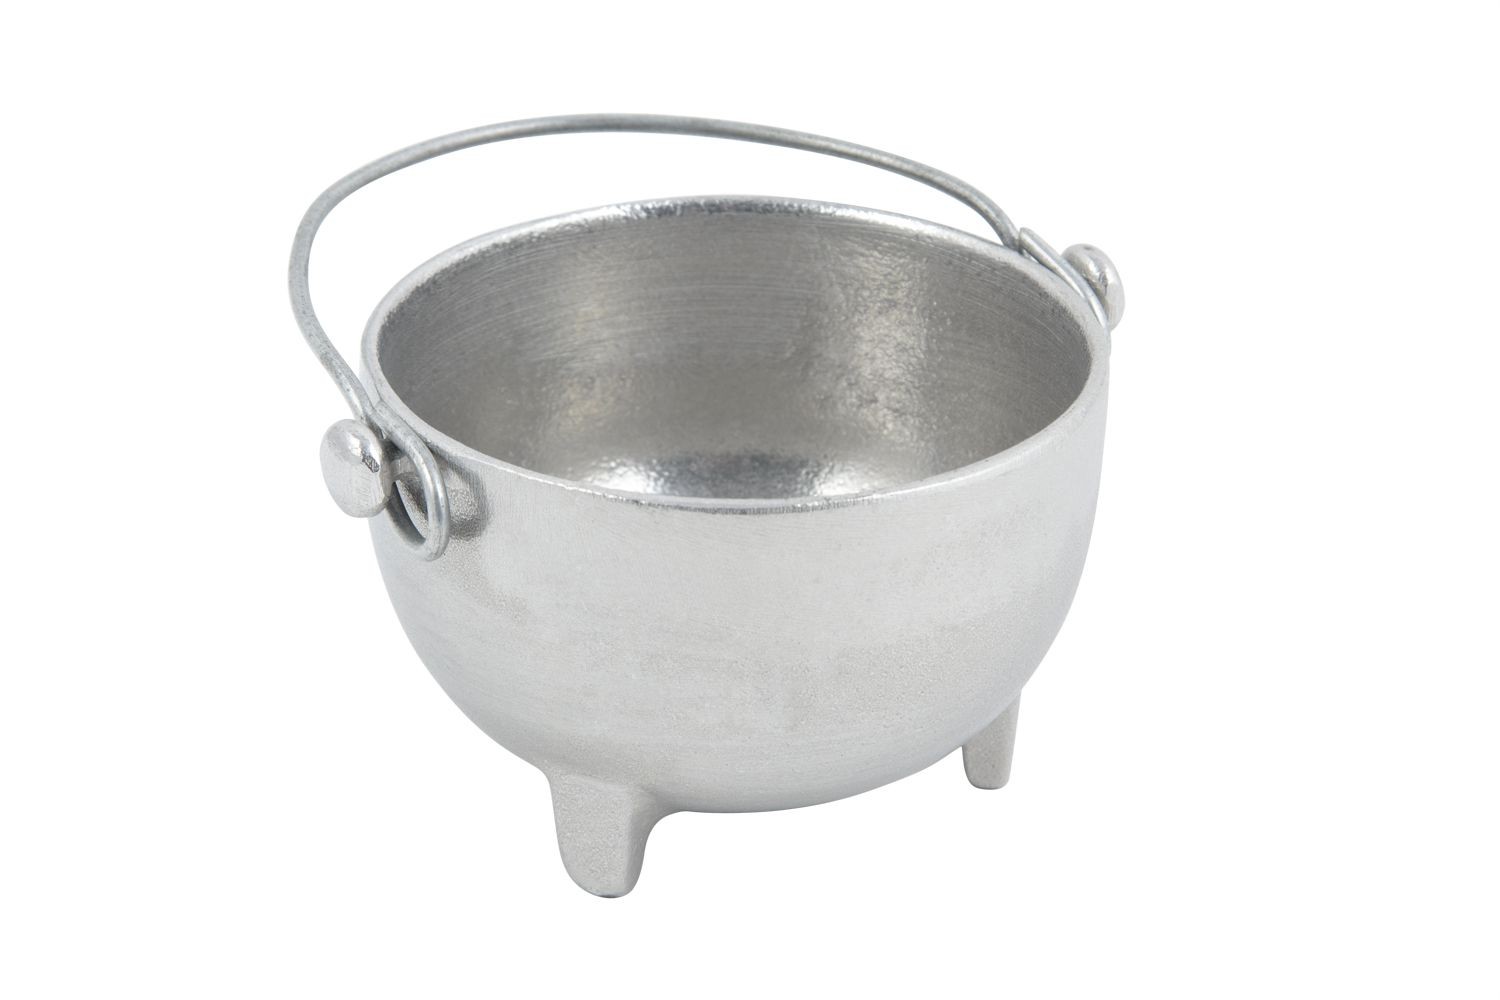 Bon Chef 3029P Kettle Style Soup Bowl with Bail Handle, Pewter Glo 9 oz., Set of 12